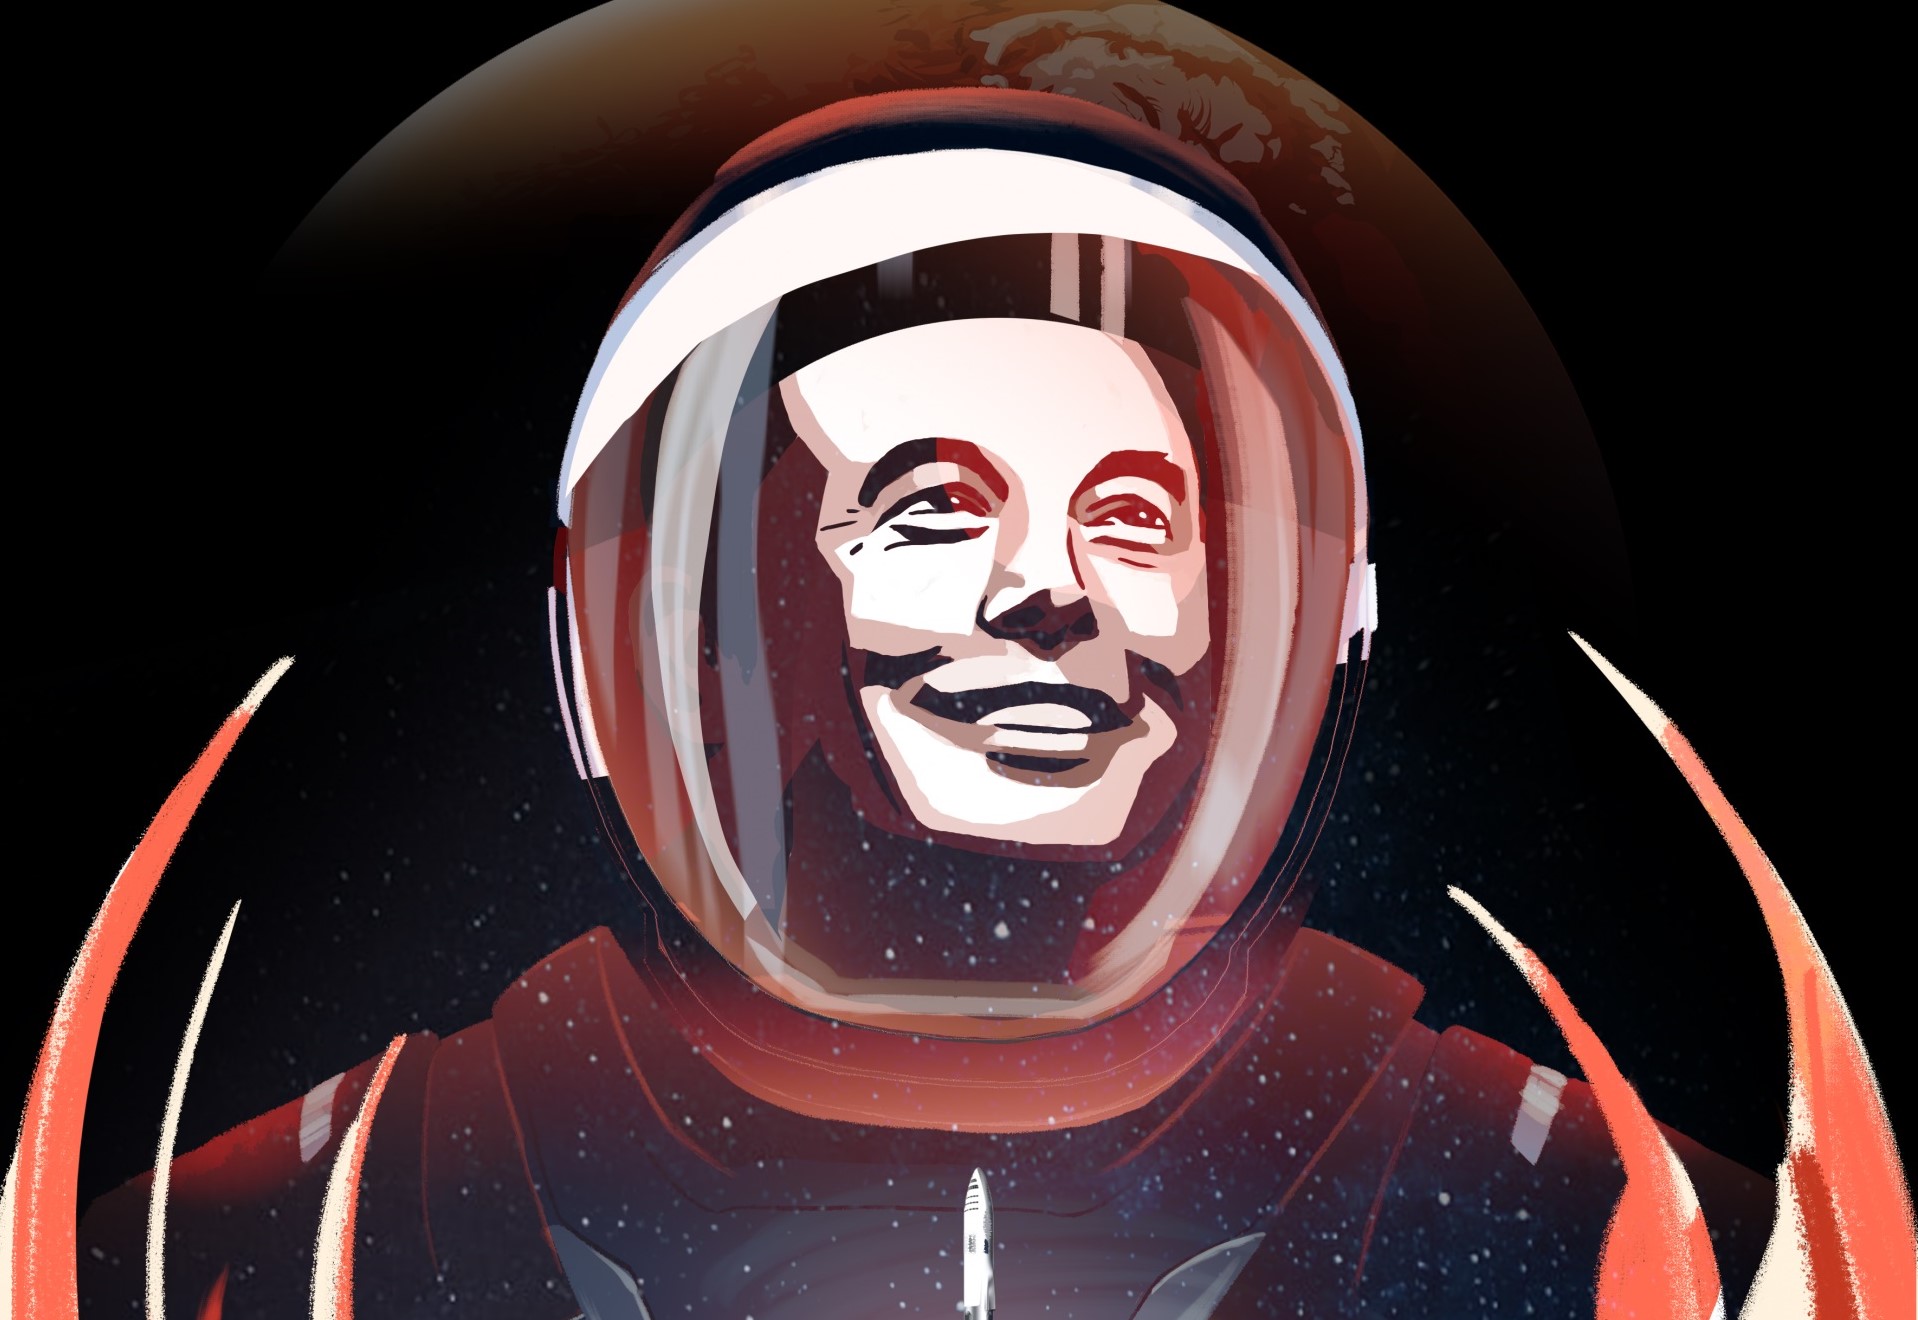 Elon Musk's Mars ambitions honored in Moon-landing anniversary animation